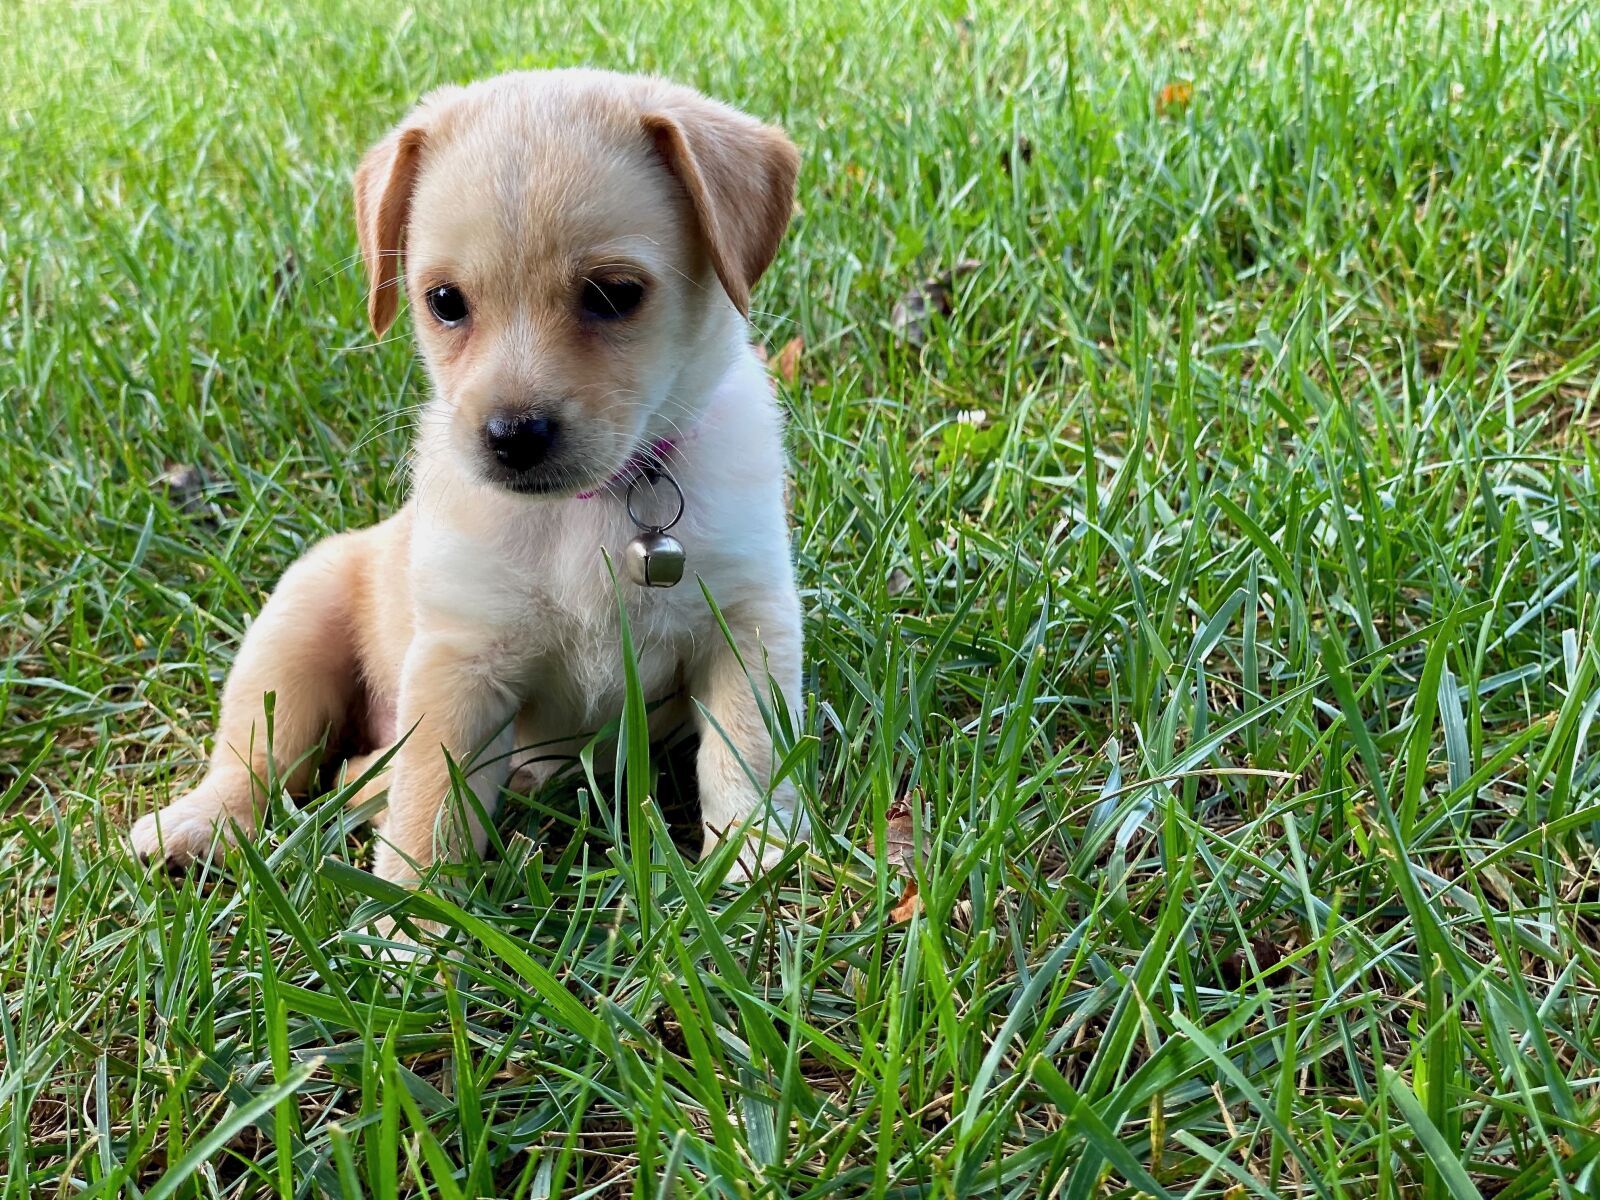 Apple iPhone 11 Pro + iPhone 11 Pro back dual camera 6mm f/2 sample photo. Puppy, grass, dog photography